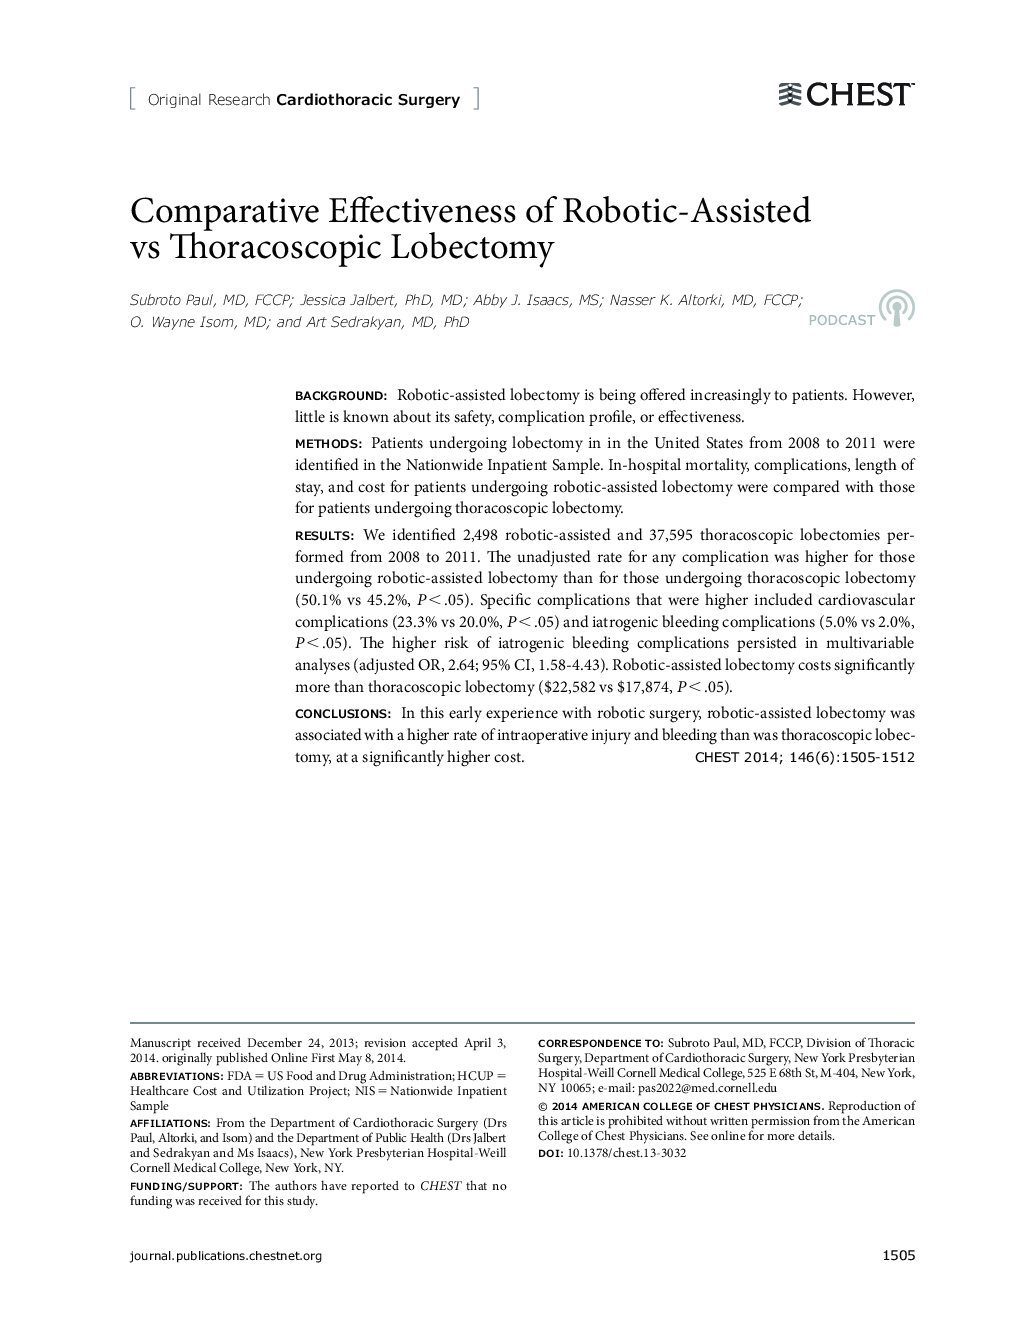 Comparative Effectiveness of Robotic-Assisted vs Thoracoscopic Lobectomy